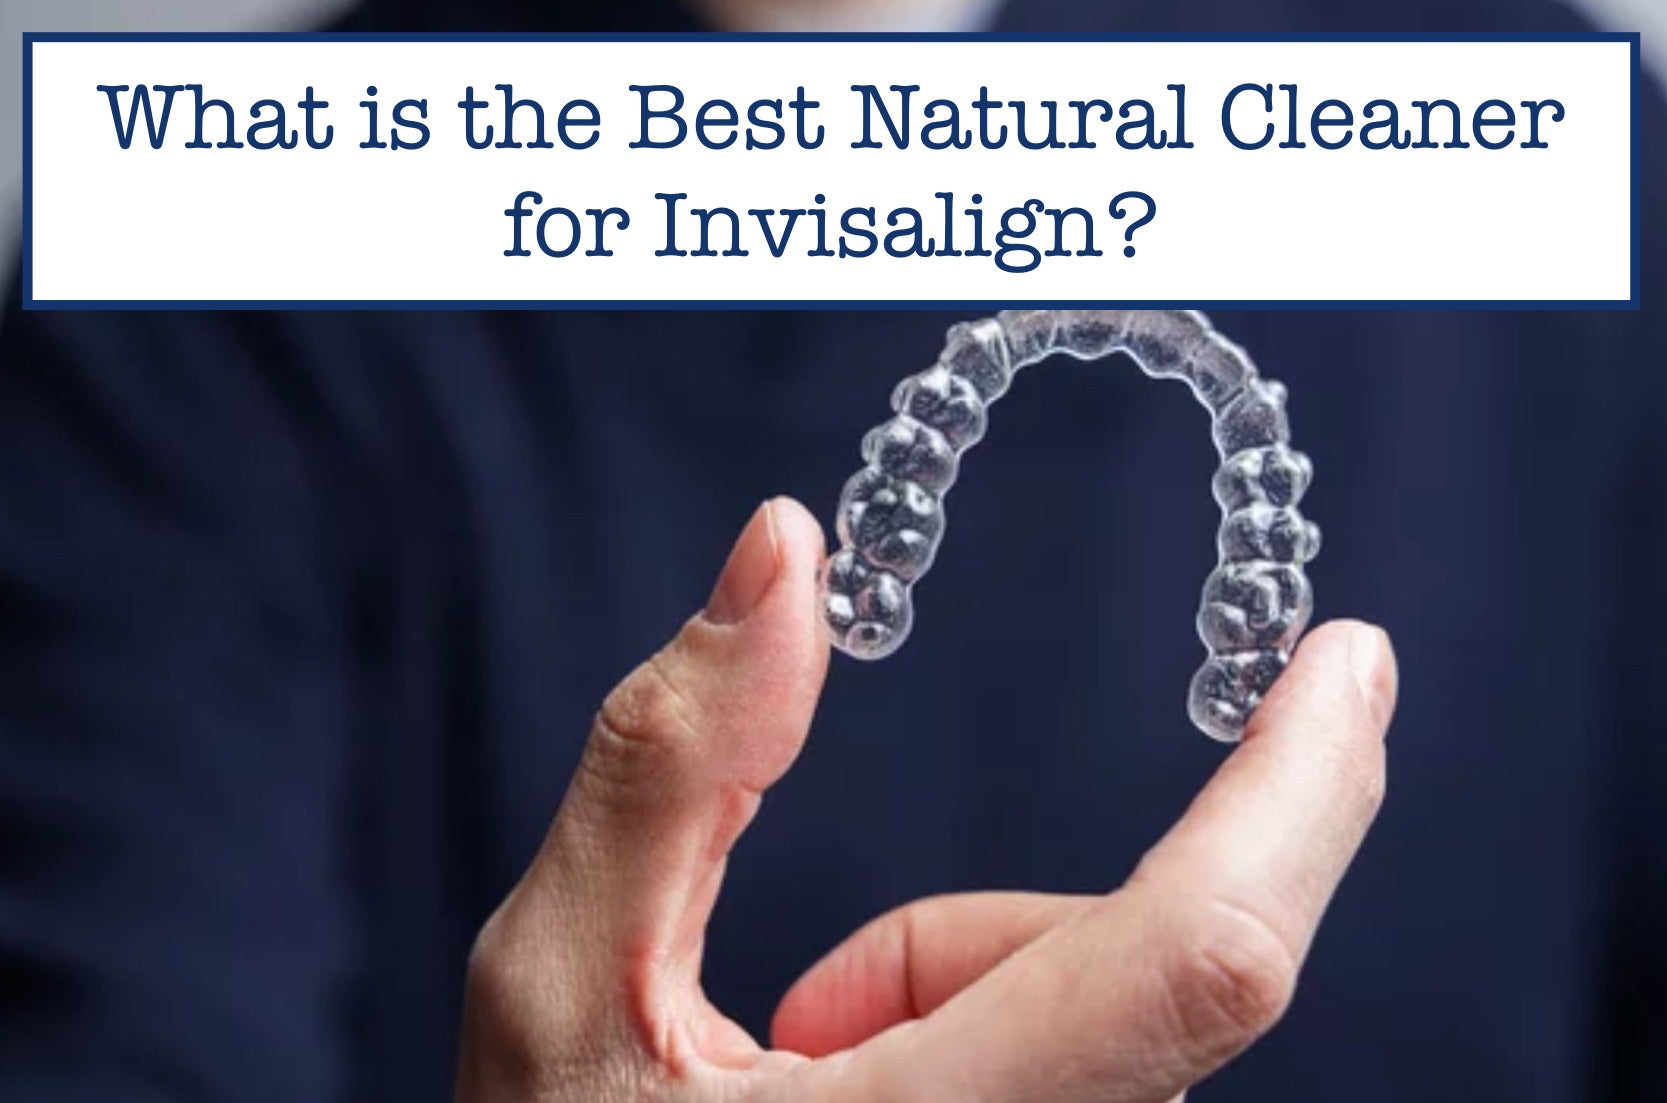 What is the Best Natural Cleaner for Invisalign?